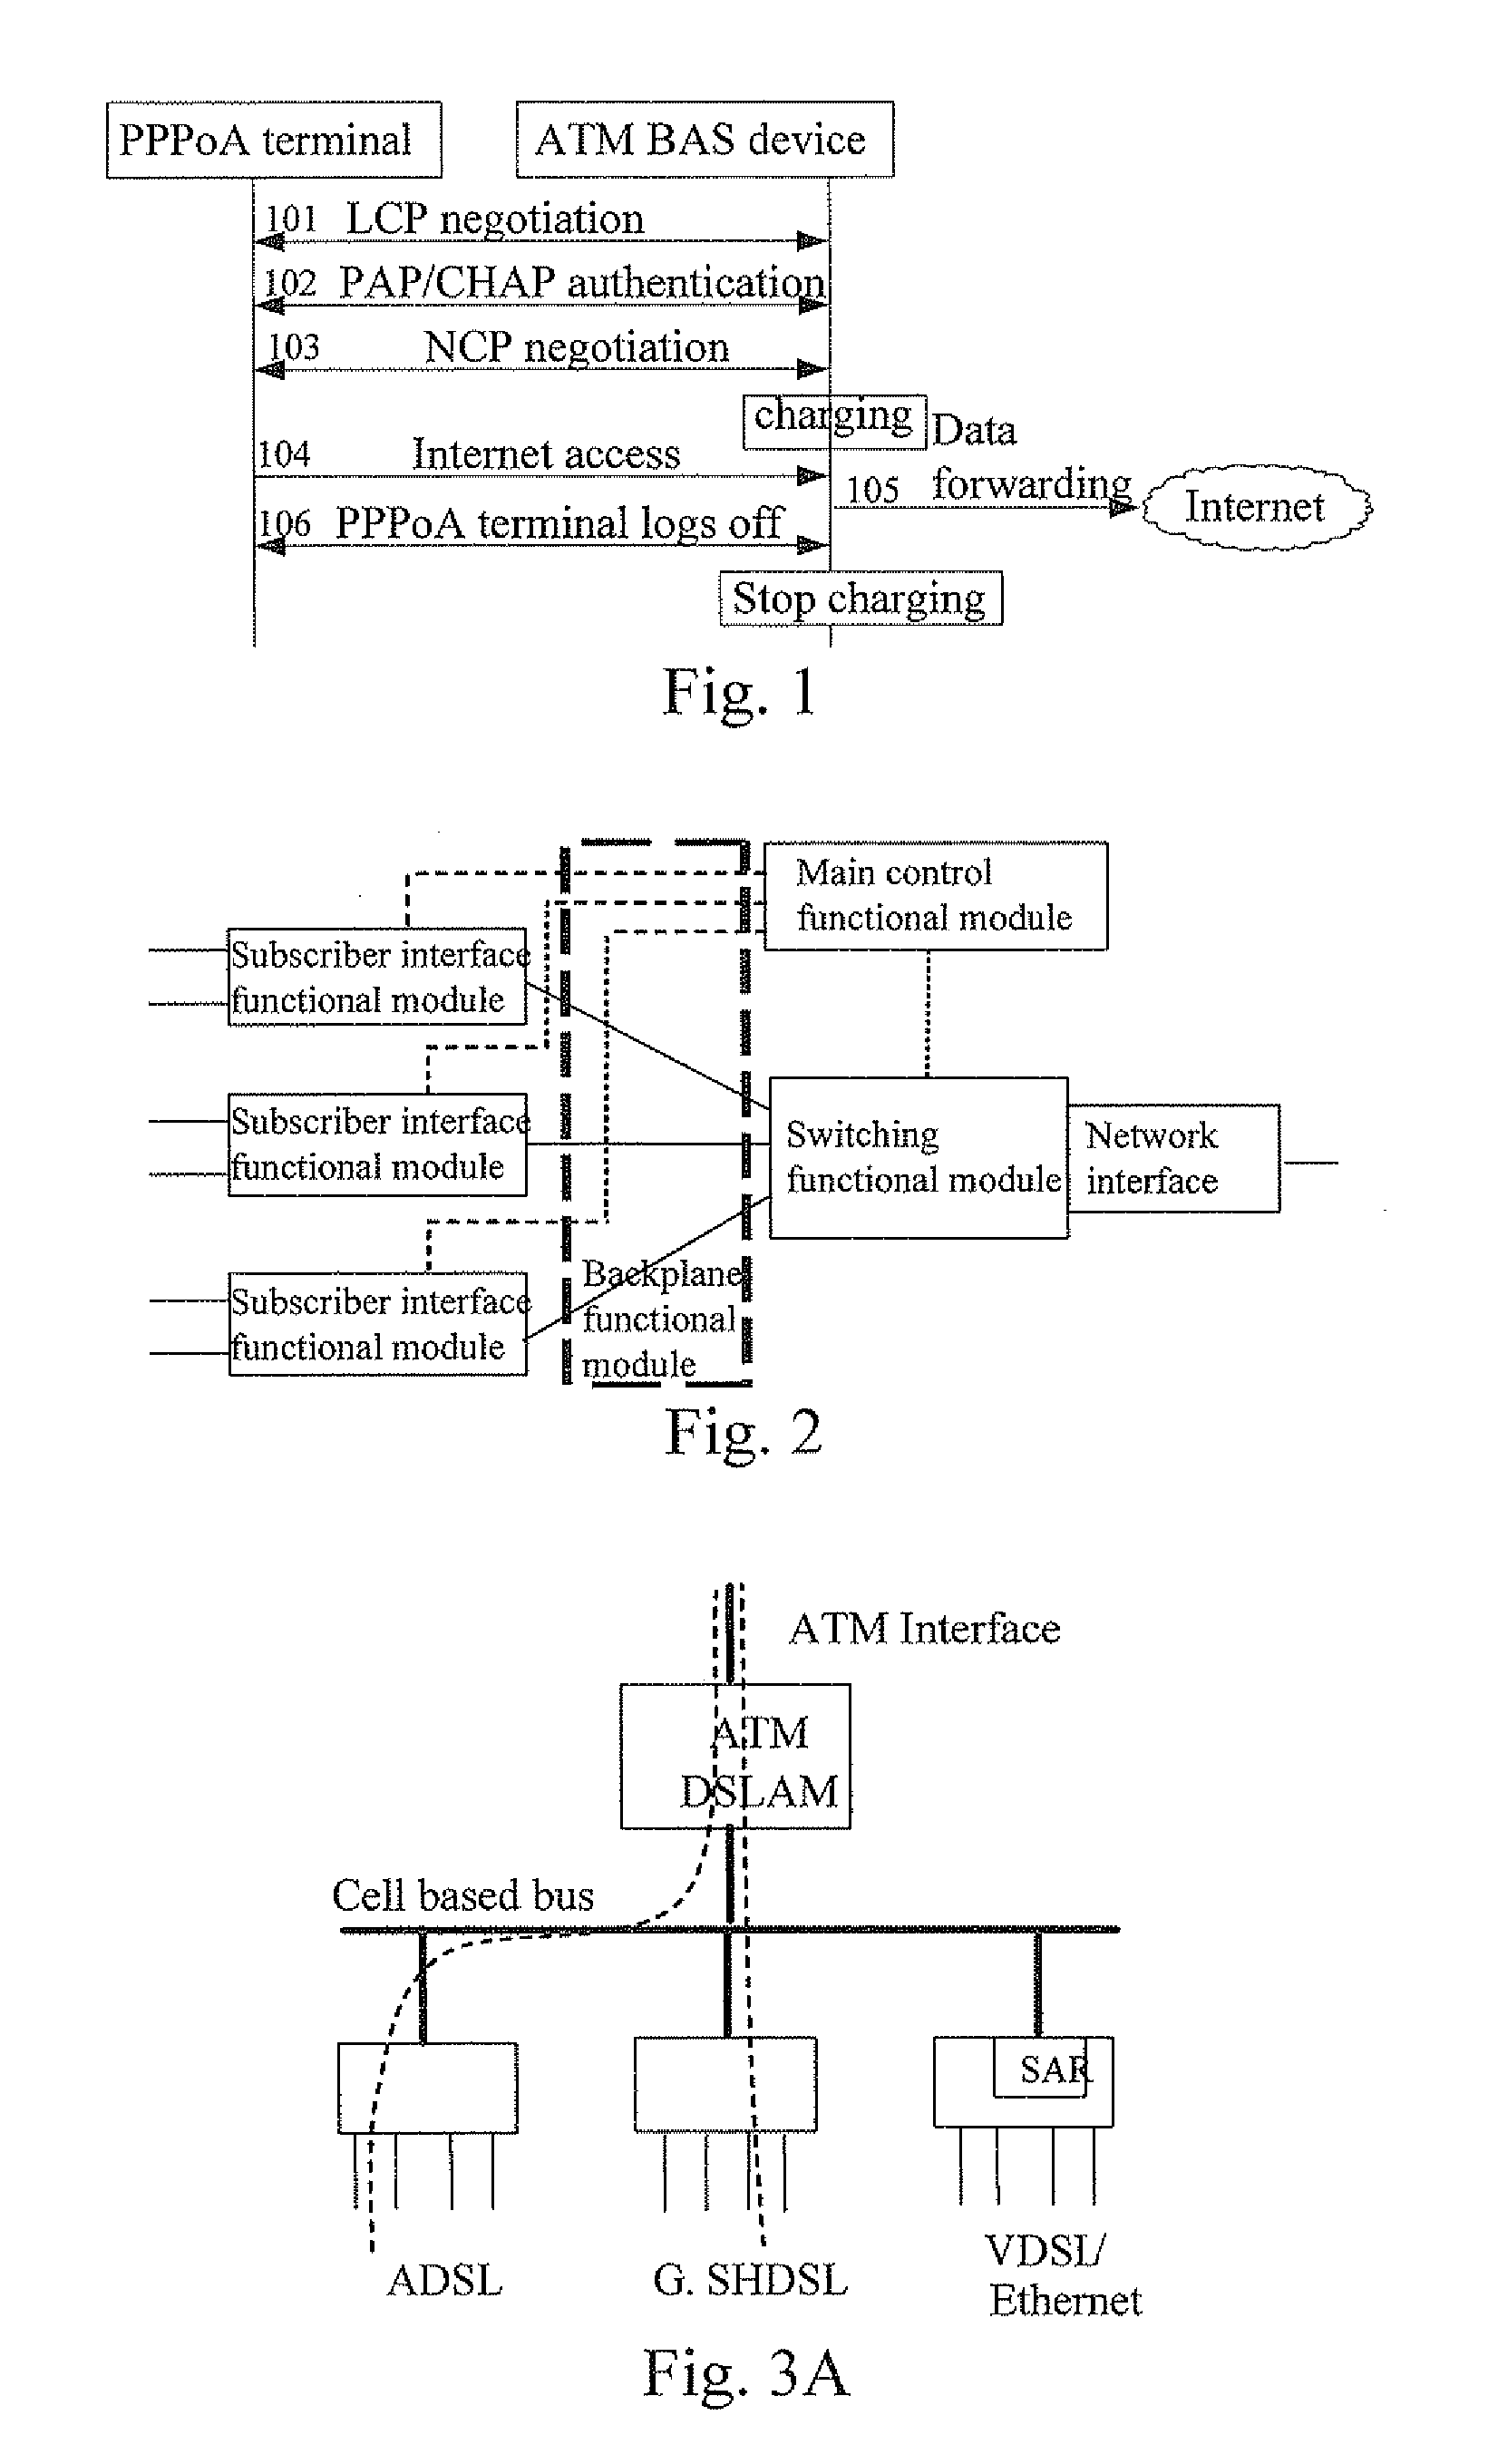 Method and Device for Supporting Access of Point to Point Protocol over ATM Terminal